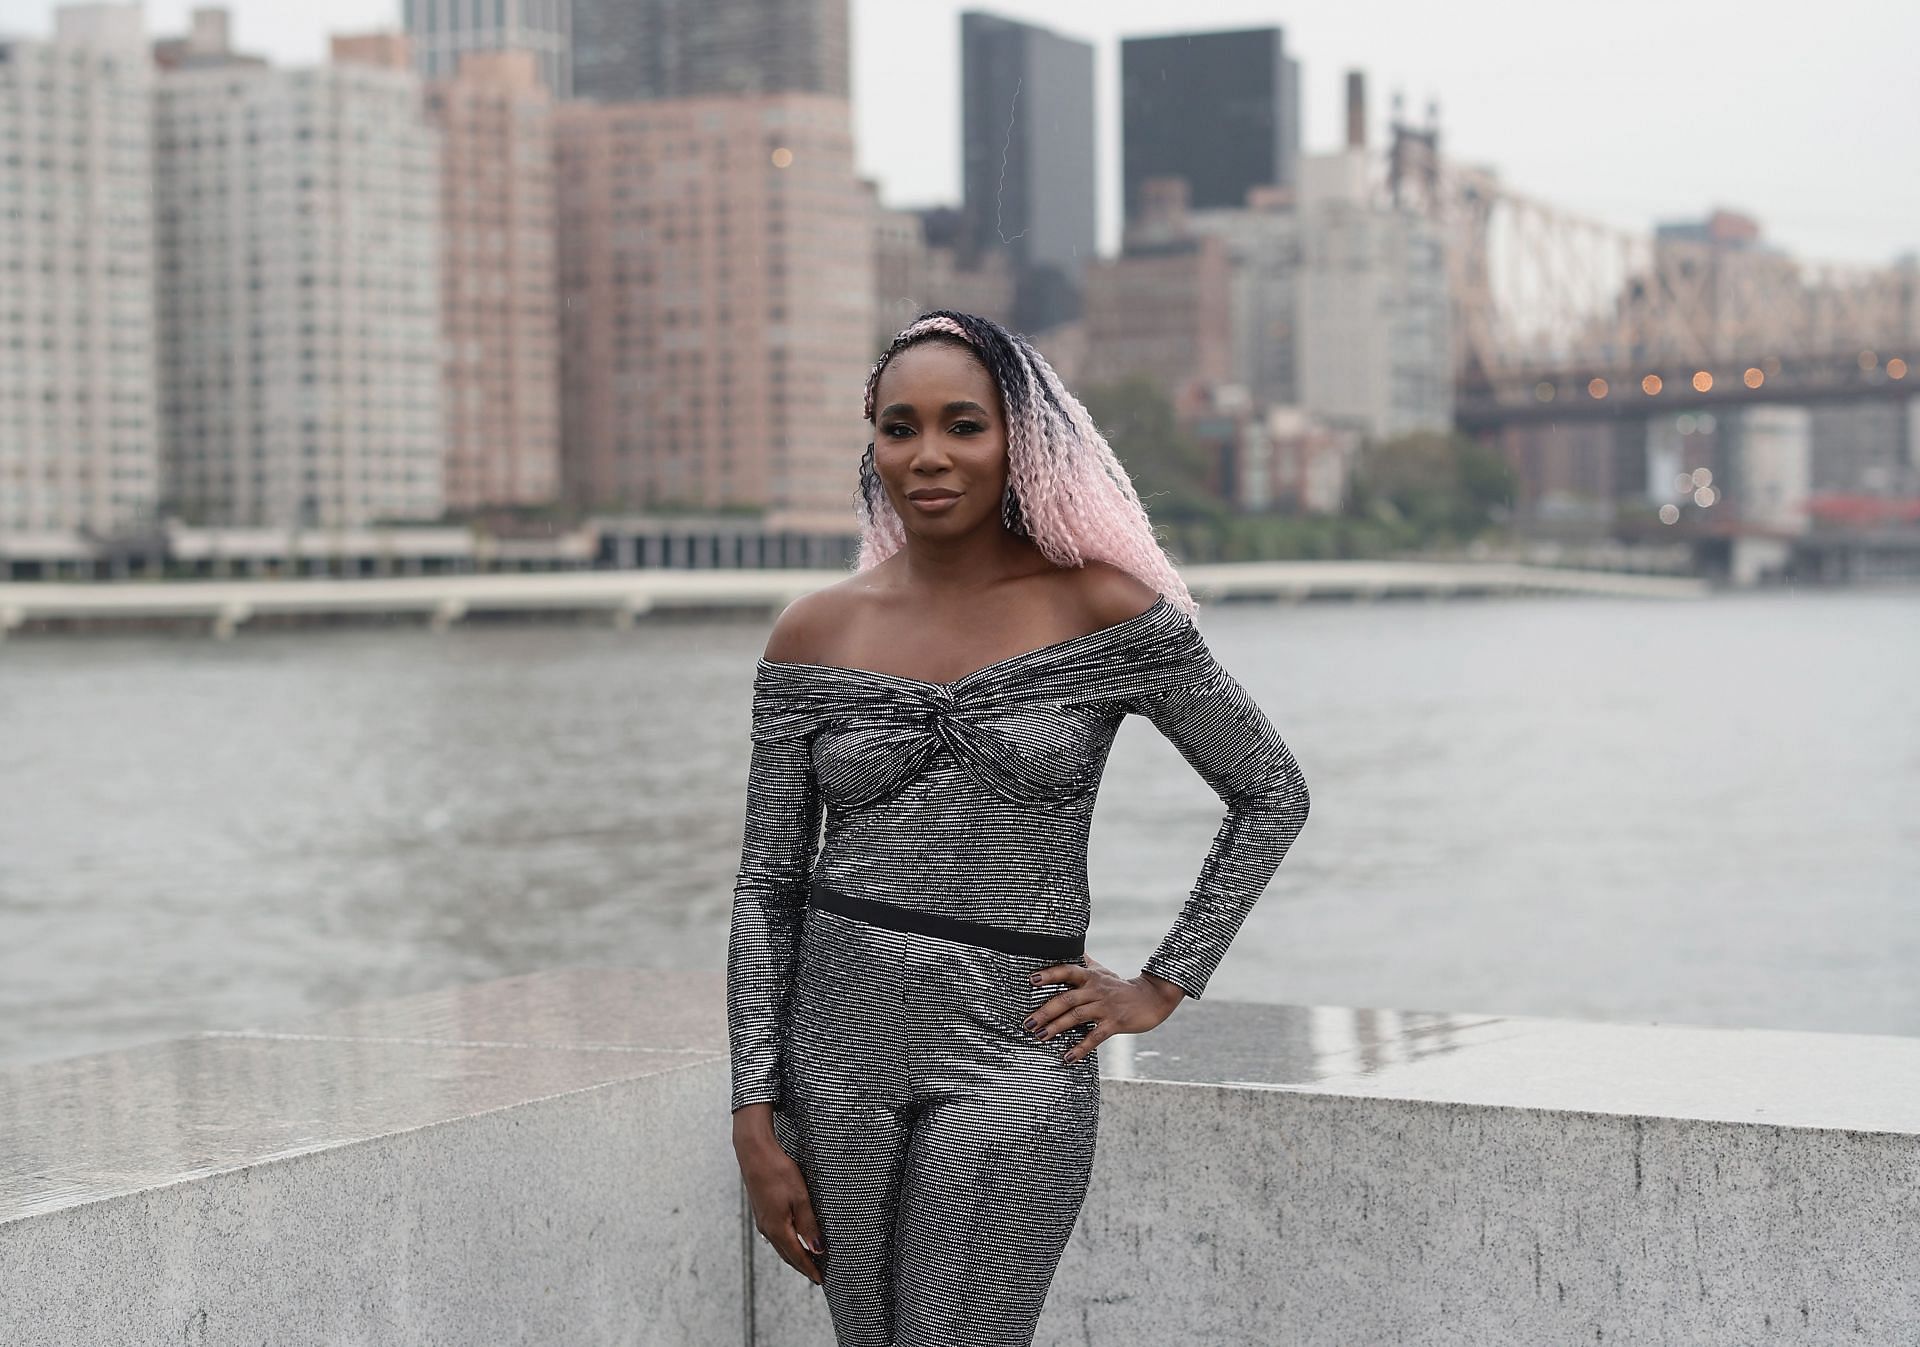 Venus Williams attends the Prabal Gurung fashion show during New York Fashion Week - Getty Images